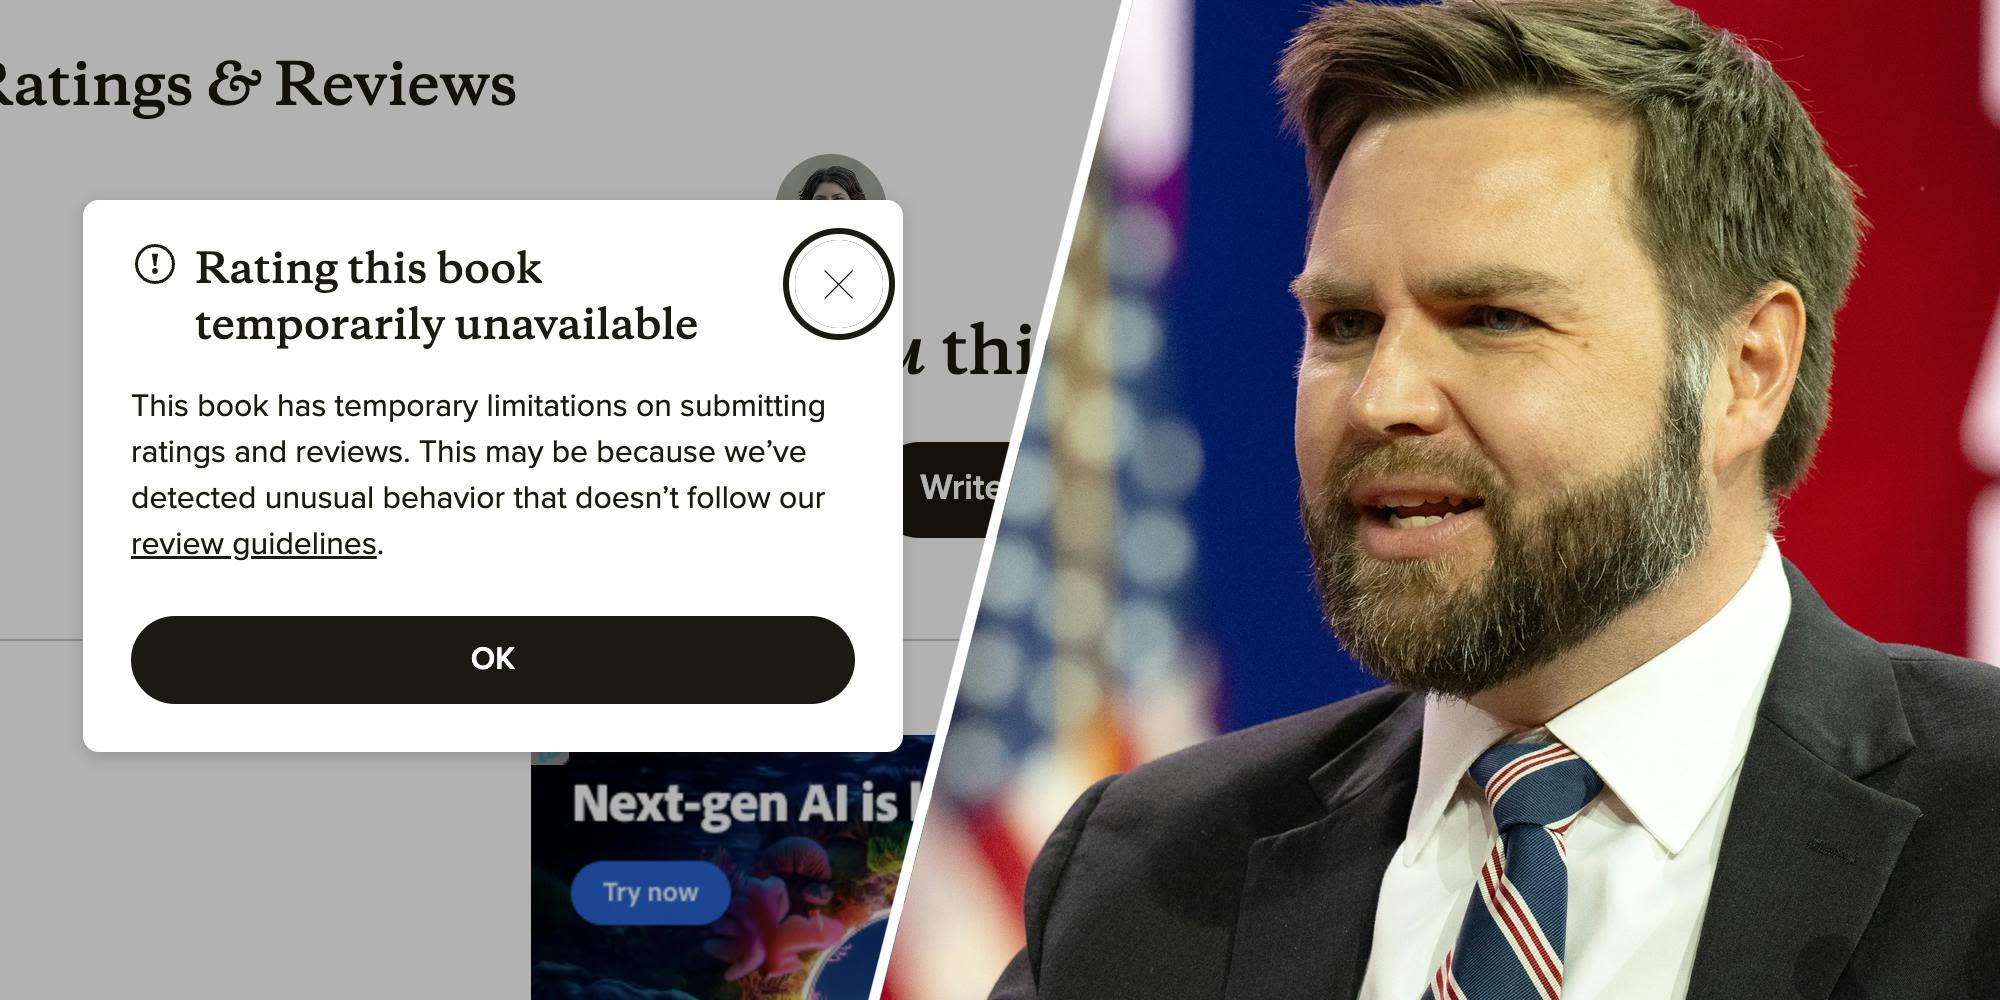 Goodreads won't let users review 'Hillbilly Elegy' in wake of J.D. Vance VP news